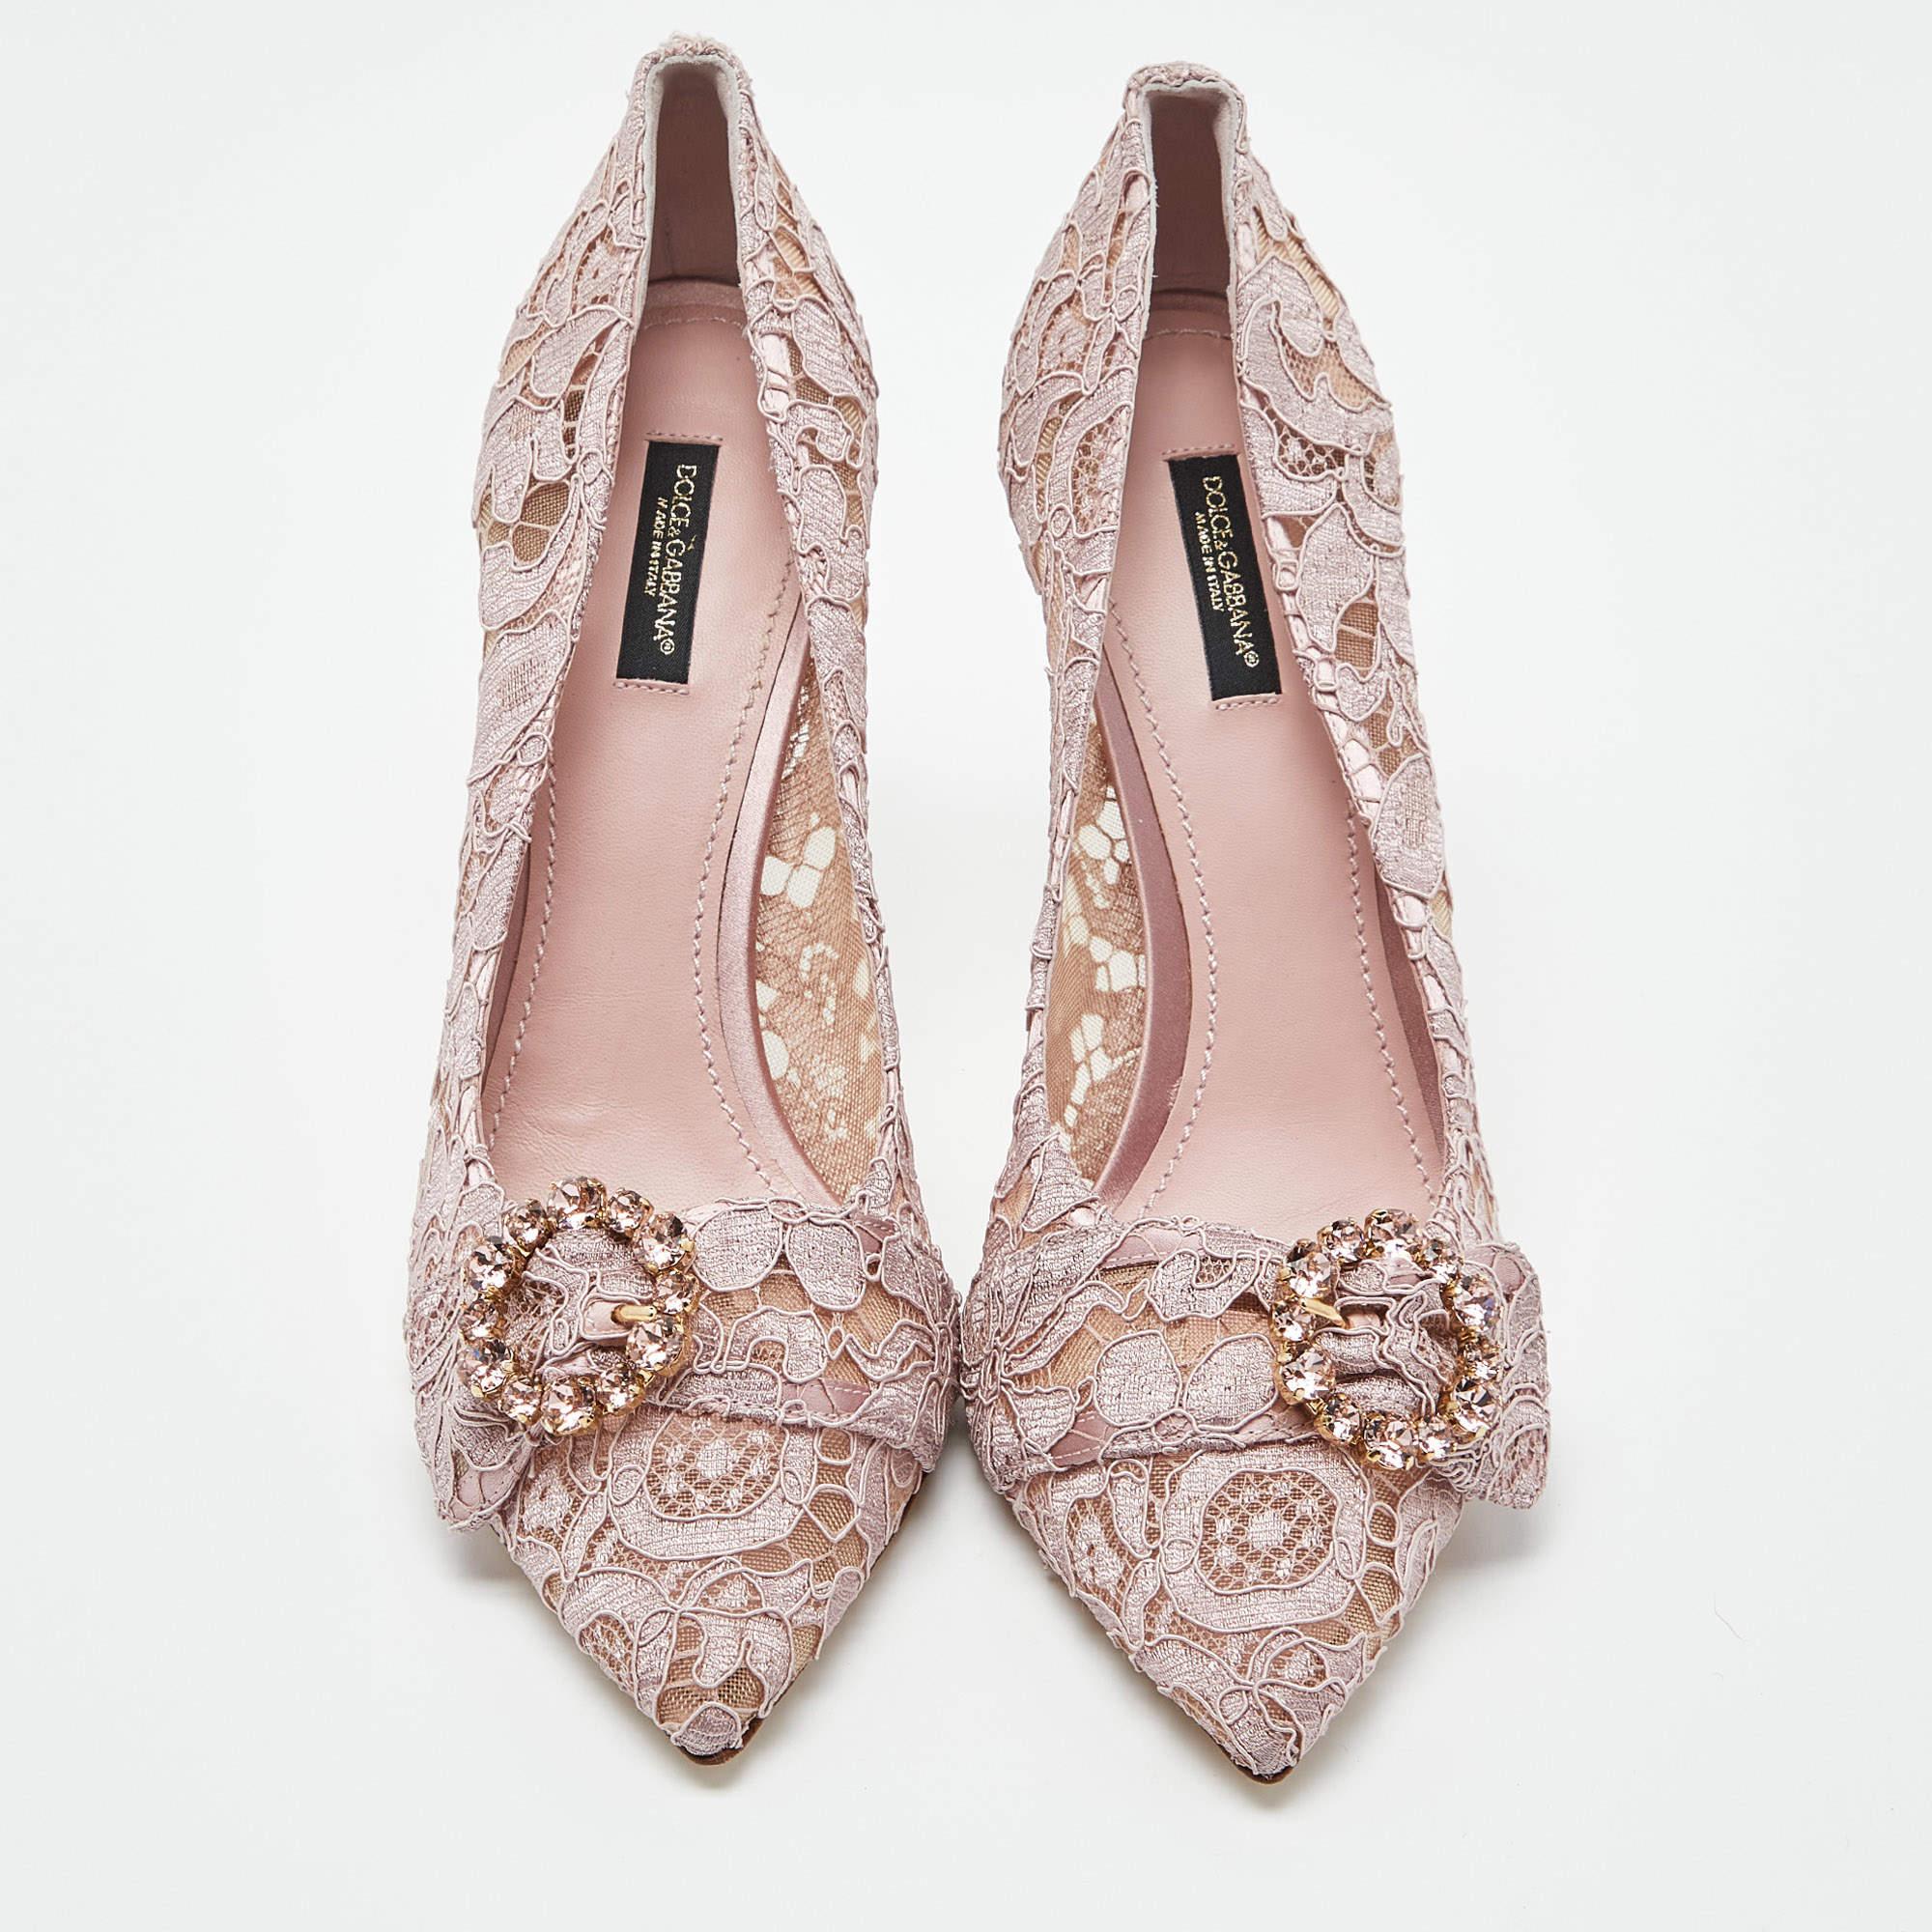 Curvaceous arches, a feminine appeal, and a well-built structure define this set of designer lace pumps. Coming with comfortable insoles and sleek heels, style them with your favorite outfits.

Includes: Original Box, Original Dustbag

